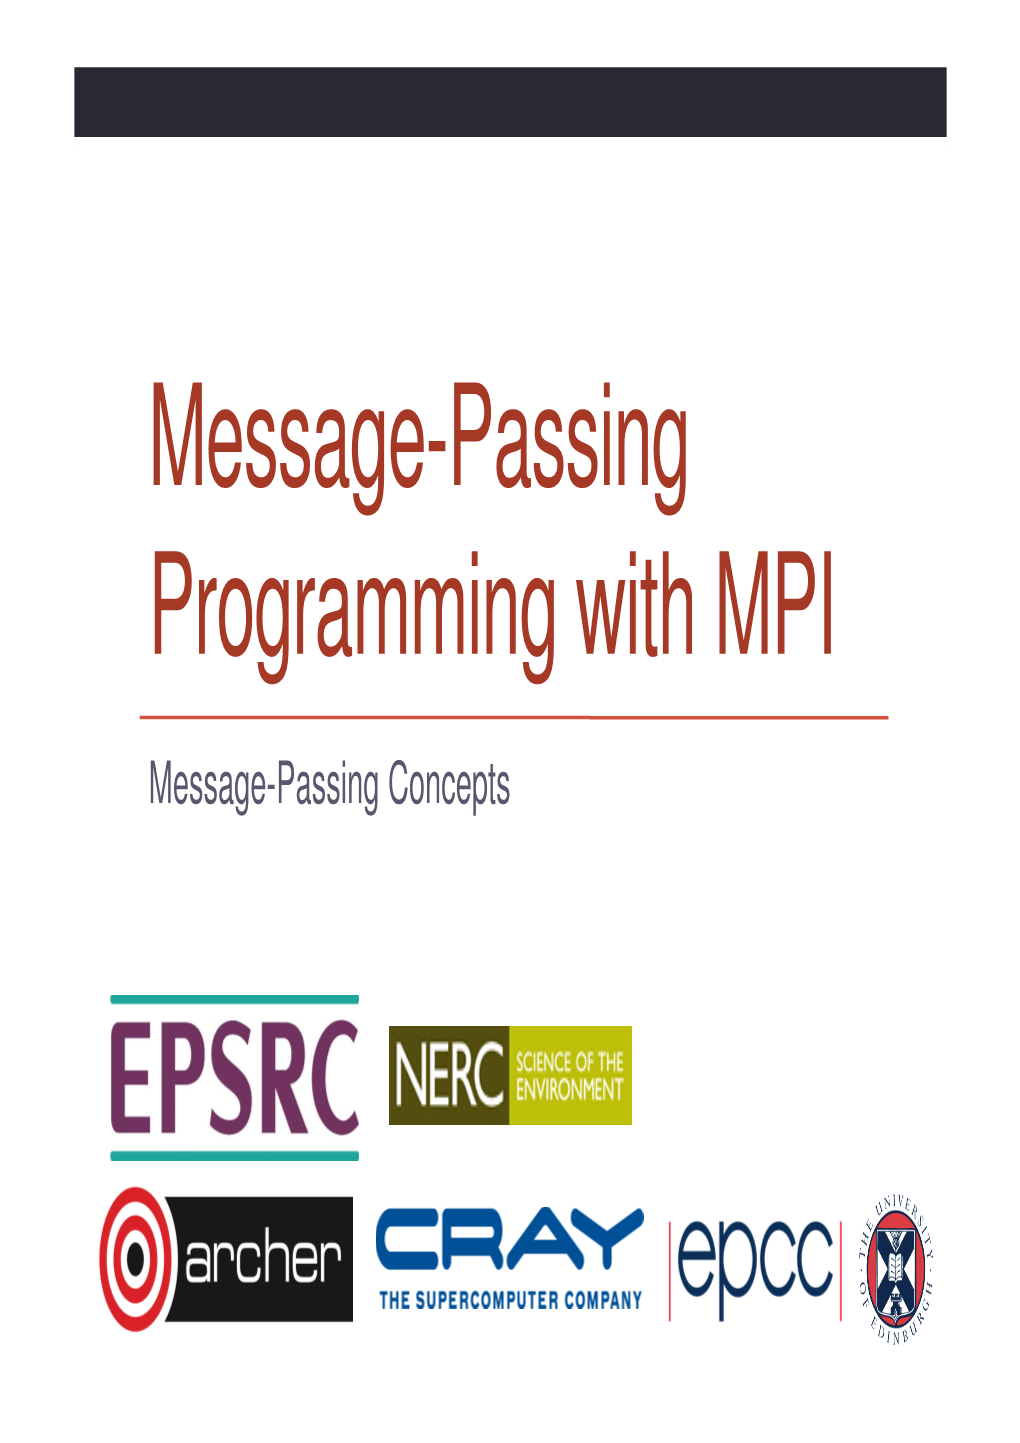 Message-Passing Programming with MPI